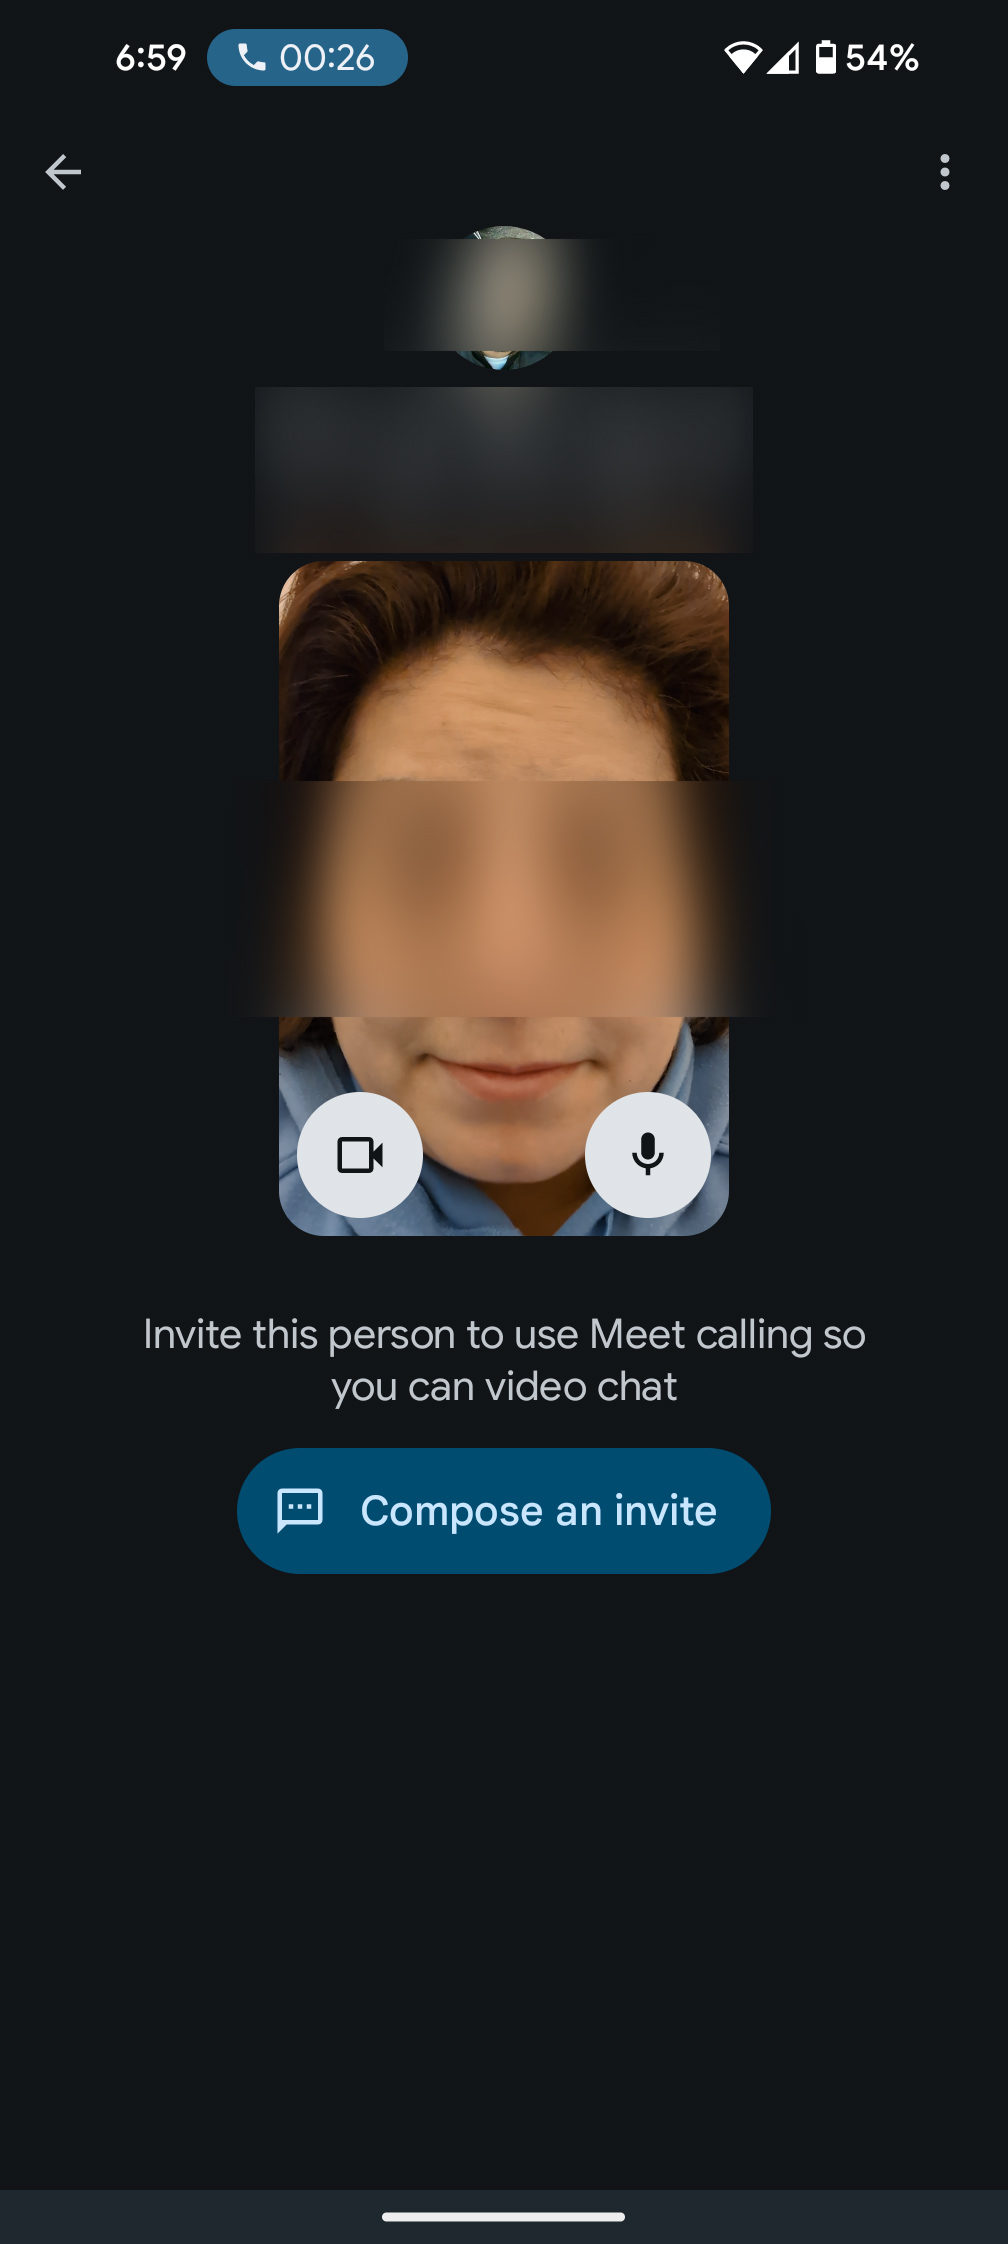 Google Phone App prompting to invite a person to Google Meet